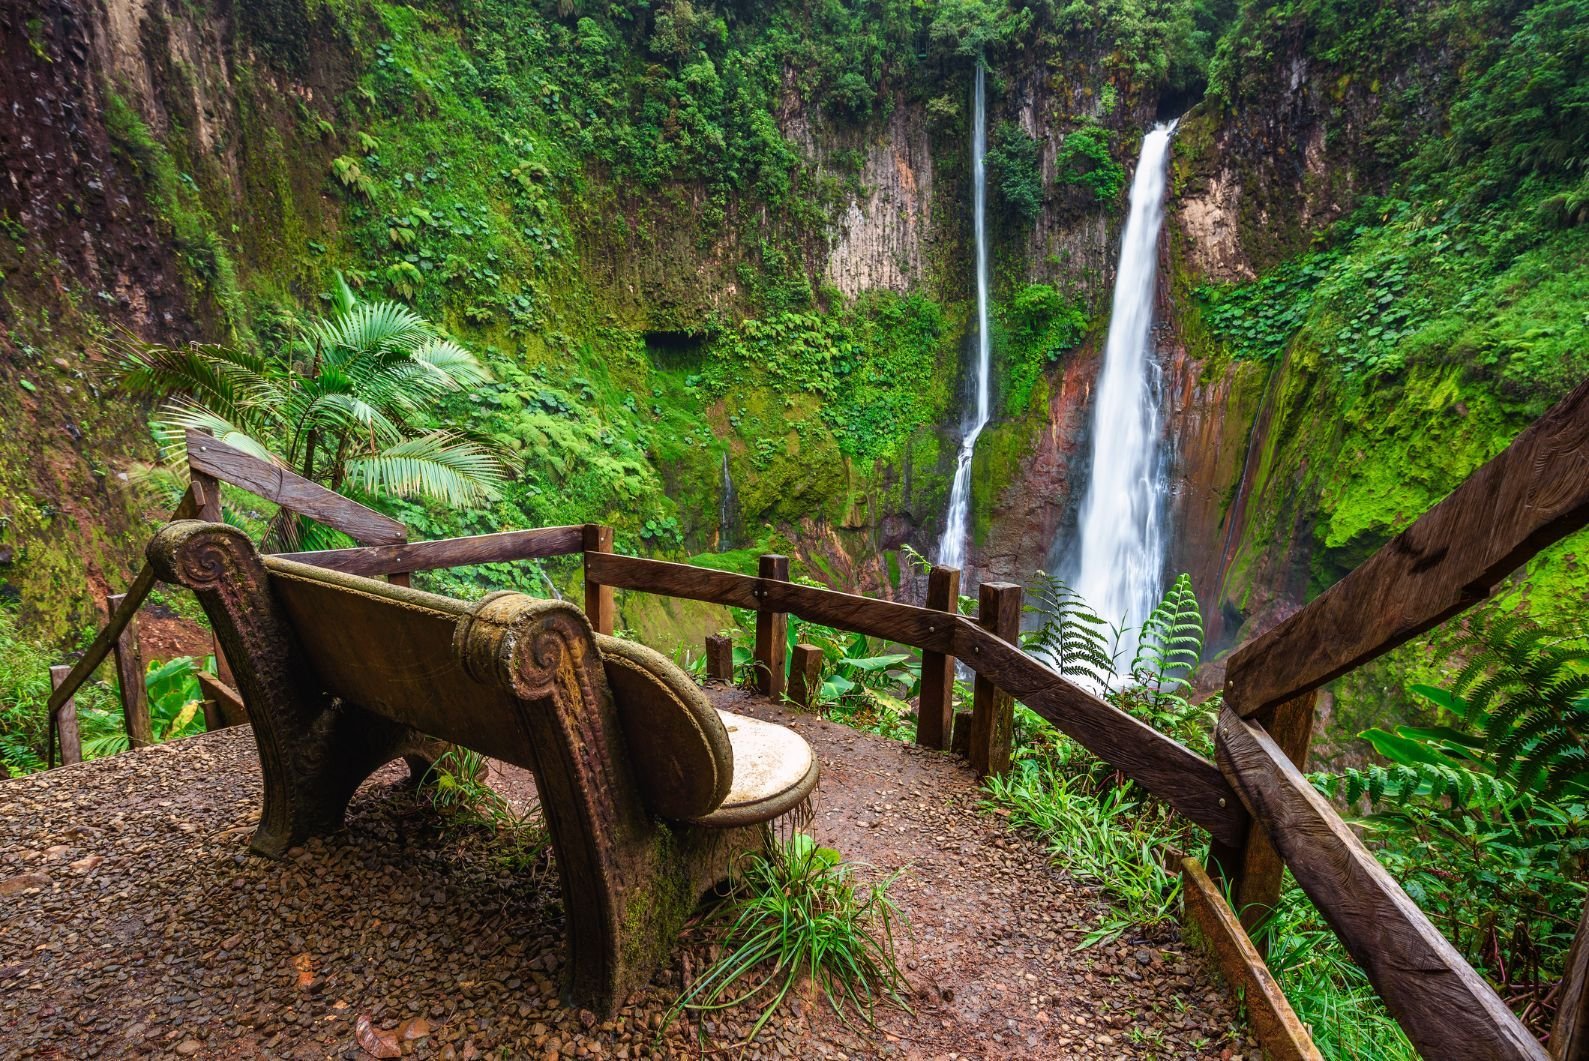 See this bench? This bench here looking at the Catarata del Toro Waterfall? You could be on it. Photo: Getty